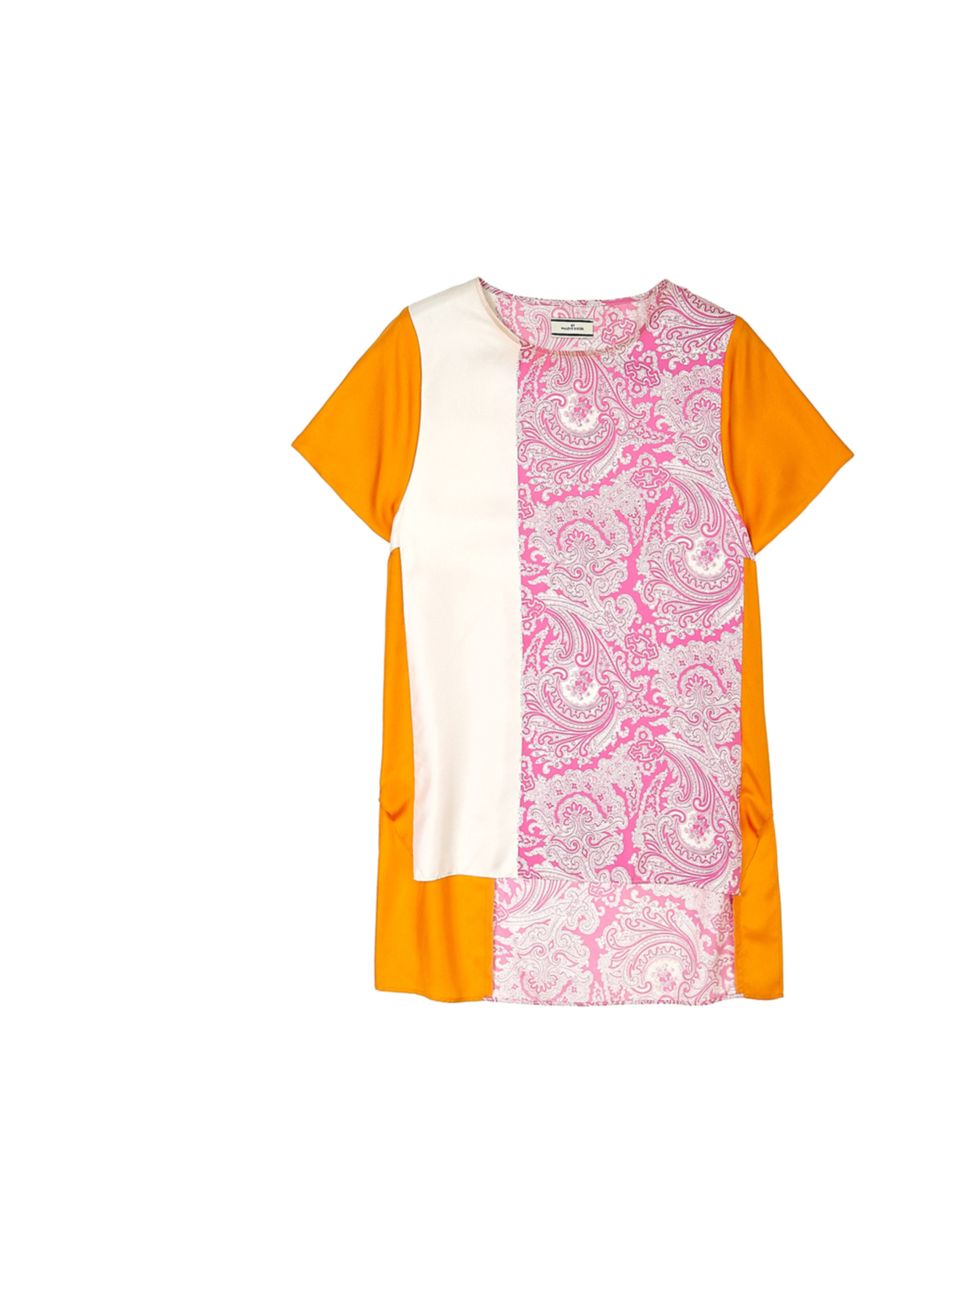 <p>Whether youre jetting off for some late winter sun or simply looking for an exotic splash of colour to layer under knits, By Malene Birger is where to head... By Malene Birger paisley silk top, £189, at My-Wardrobe</p><p><a href="http://shopping.elleu